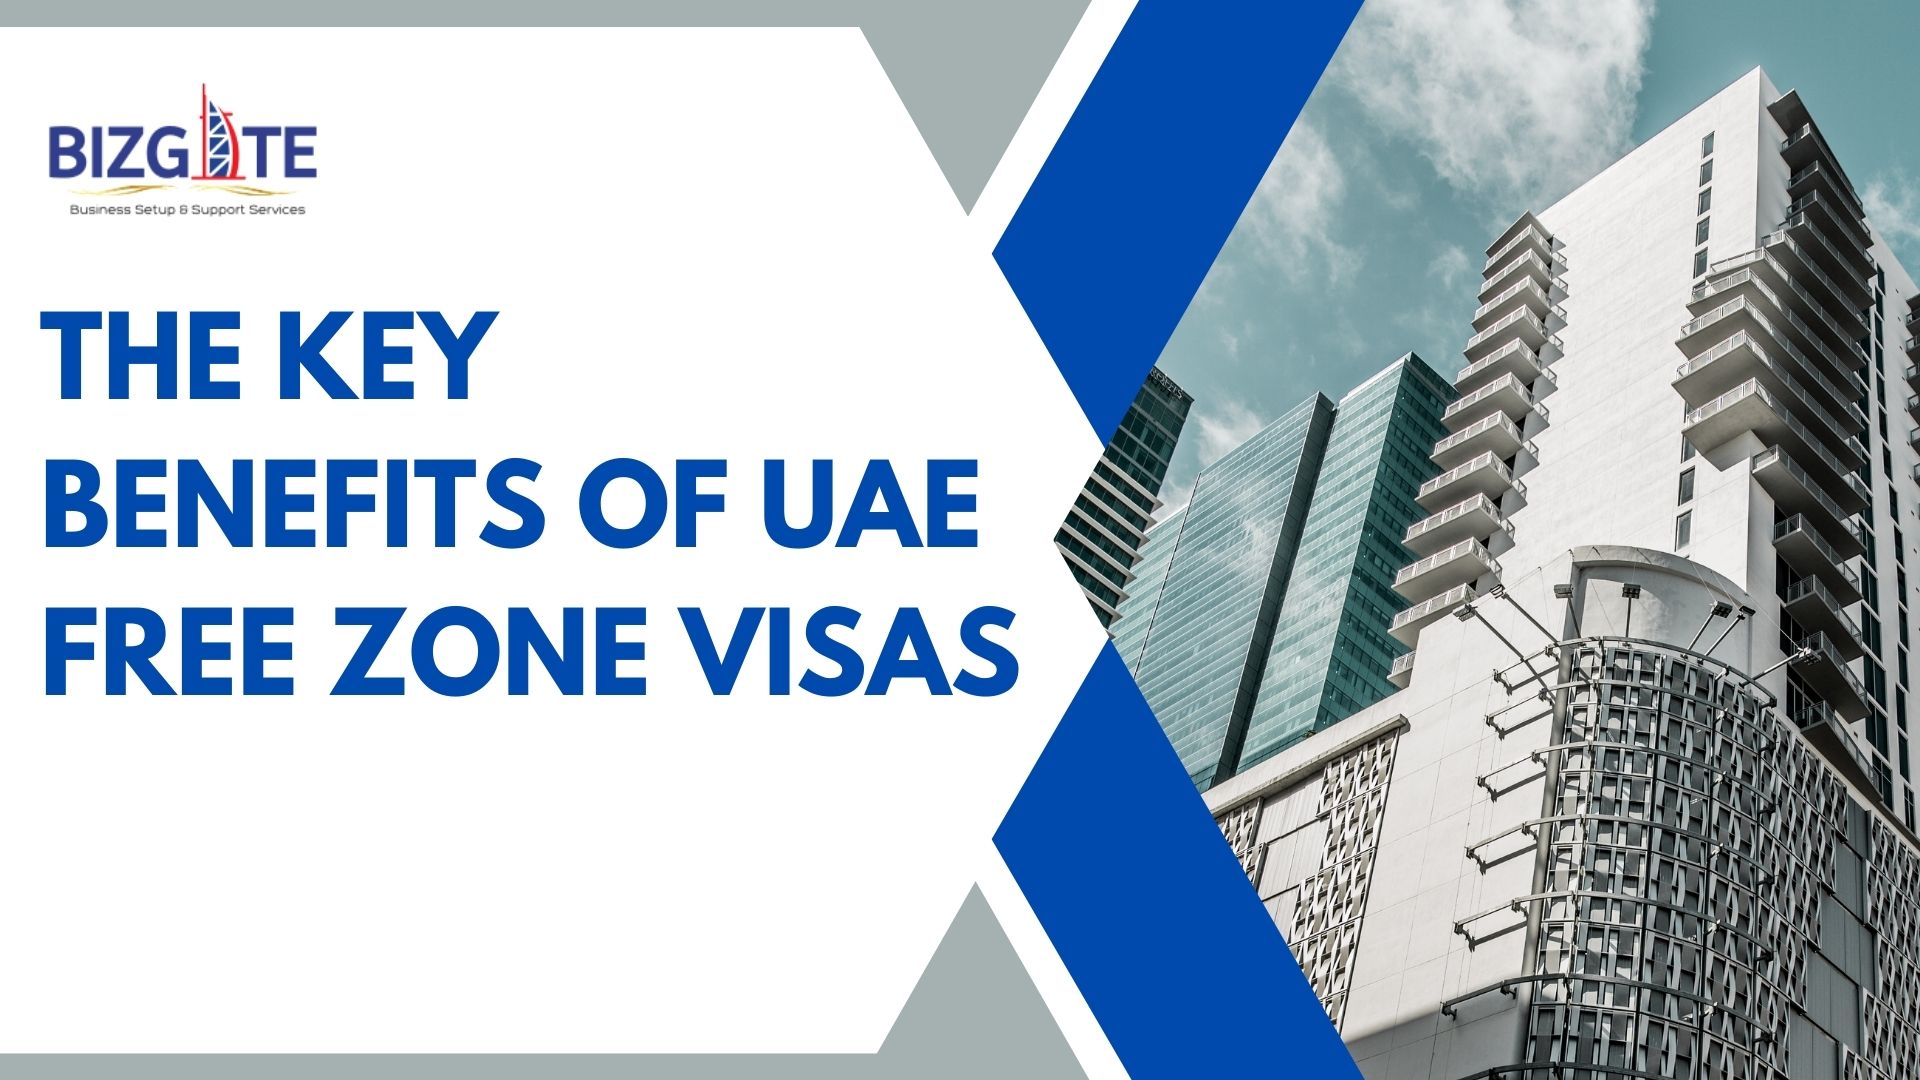 You are currently viewing The key benefits of UAE free zone visas | Business Setup in Dubai